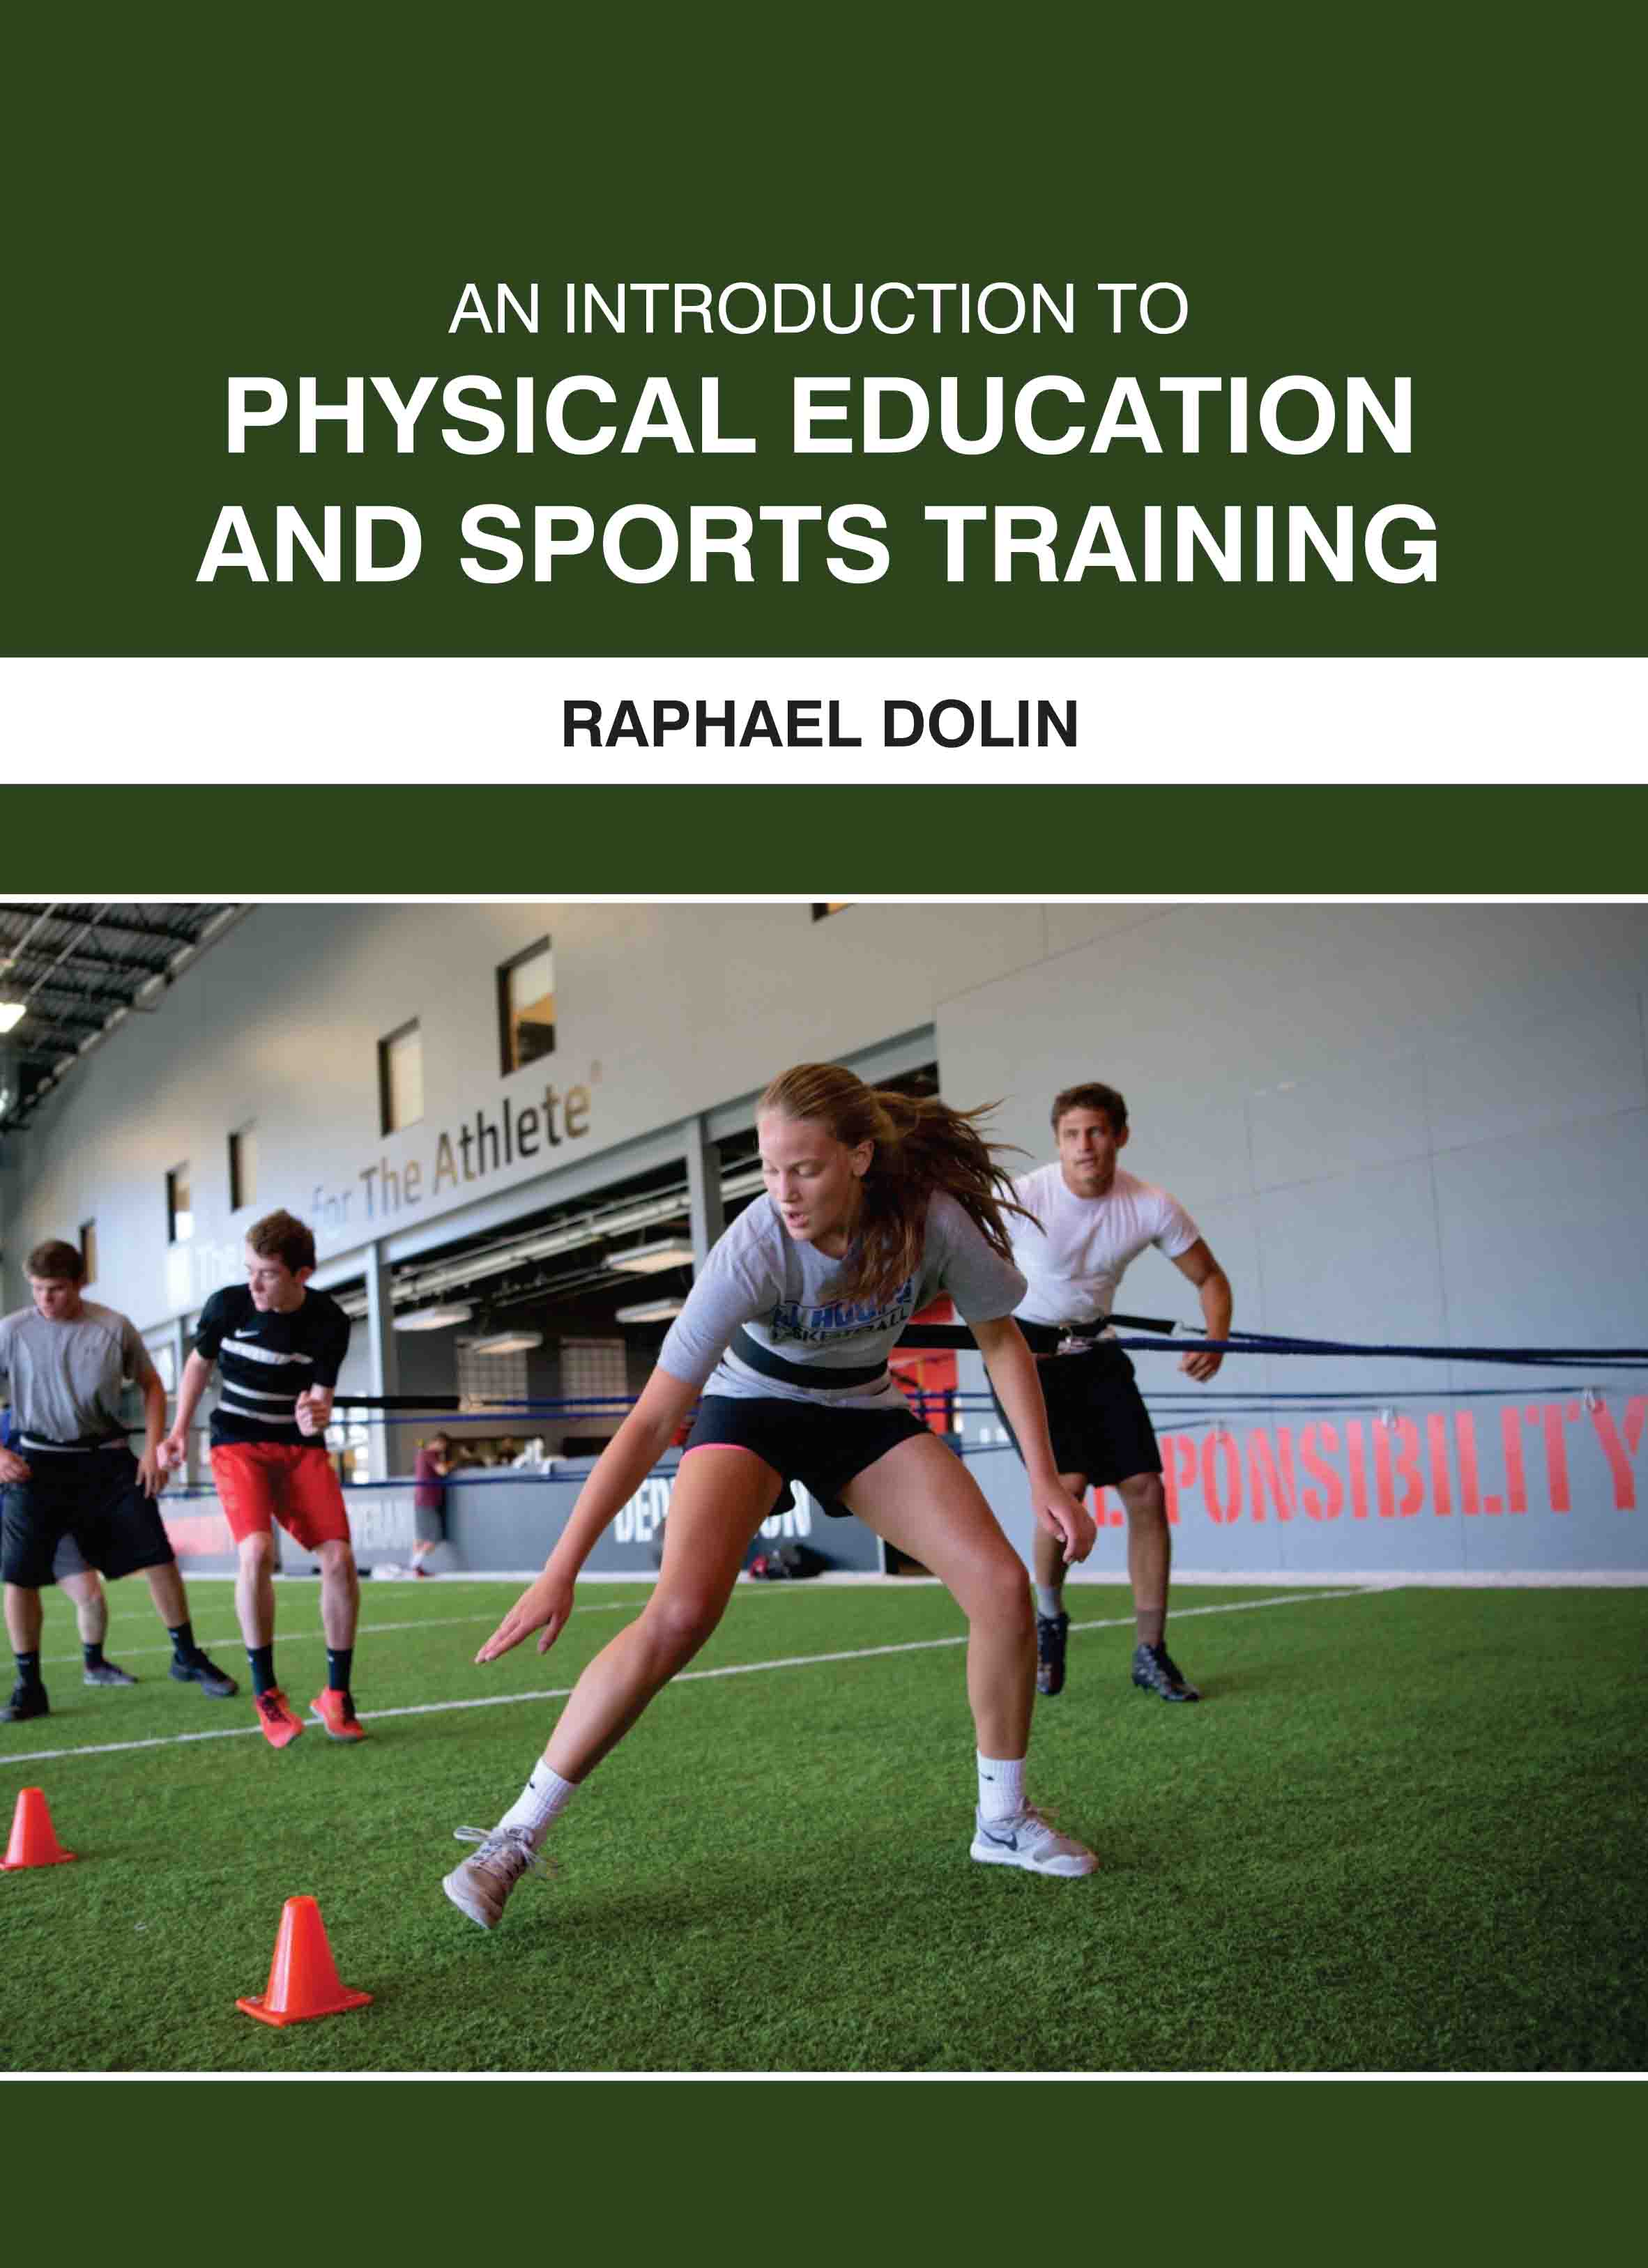 An Introduction to Physical Education and Sports Training